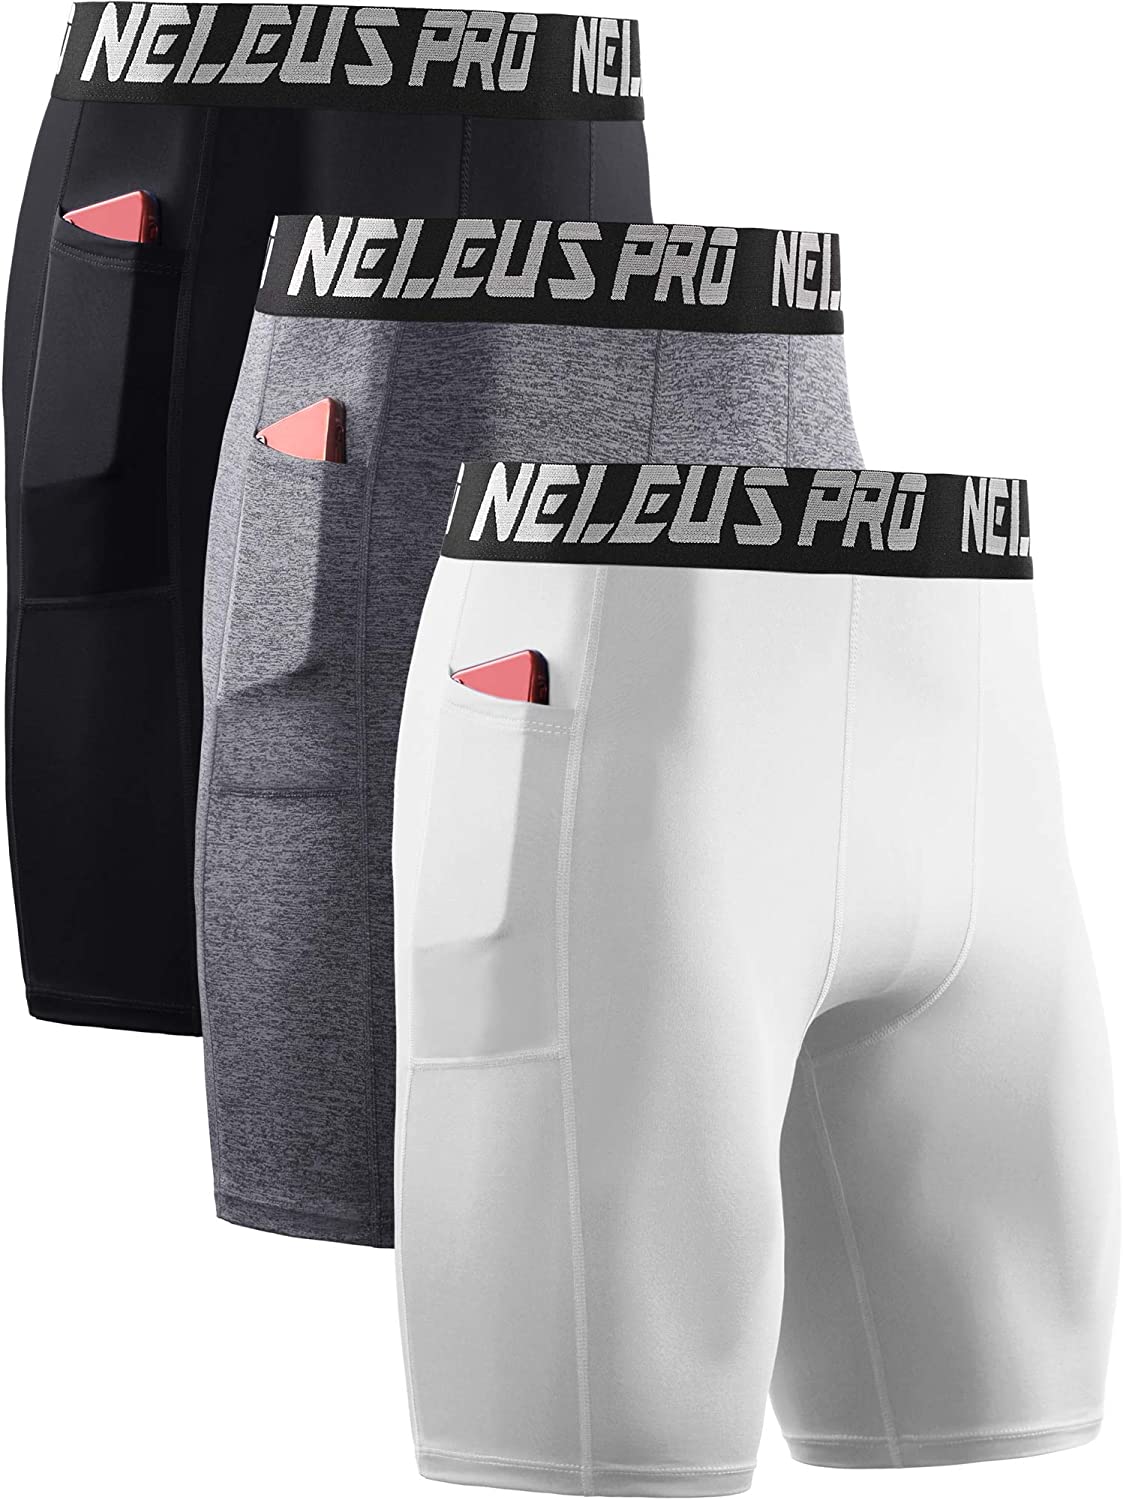 Neleus Men's Compression Shorts with Pockets Dry Fit Professional Athletic Shorts 3 Pack 